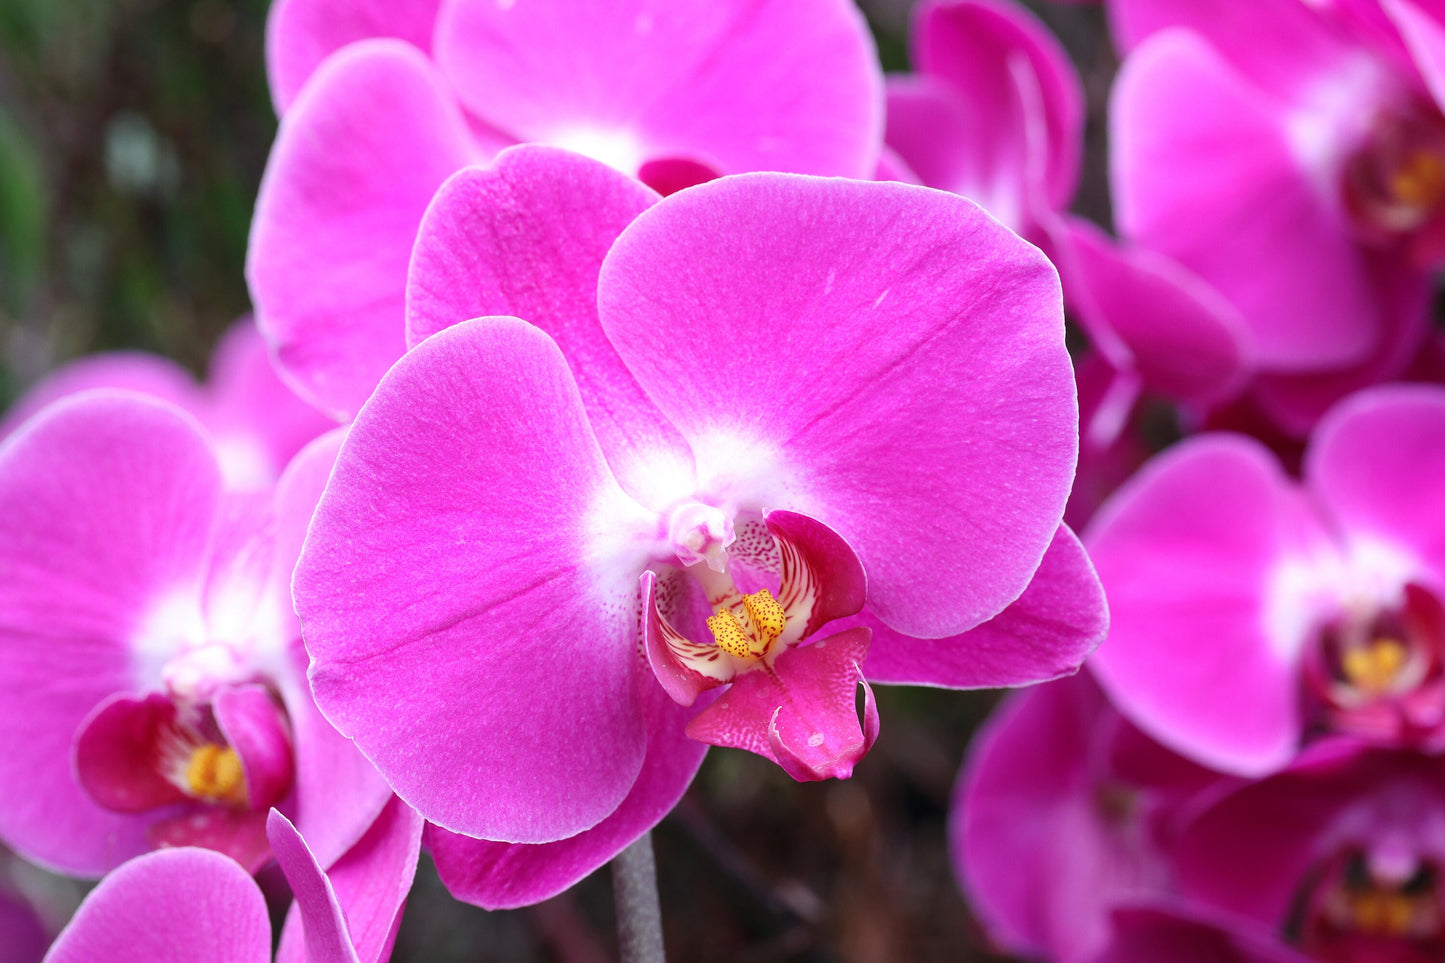 Phalaenopsis Orchid print, pink orchid in bloom photo, pink wall art, floral decor, flower photography, large paper or canvas, 5x7 to 32x48"